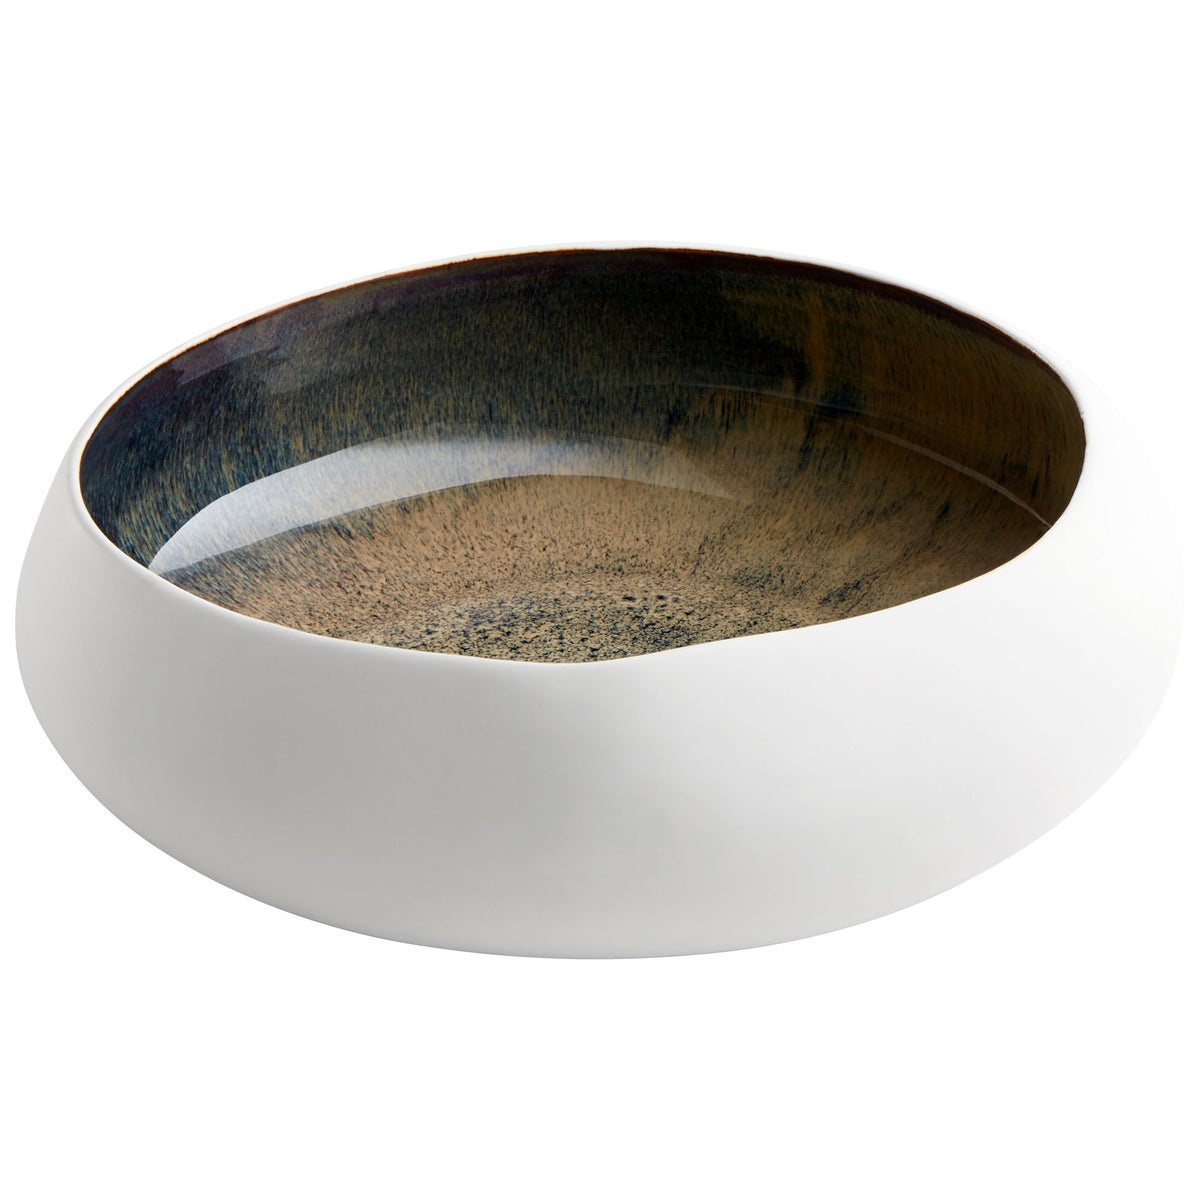 Android Bowl | White And Oyster - Medium